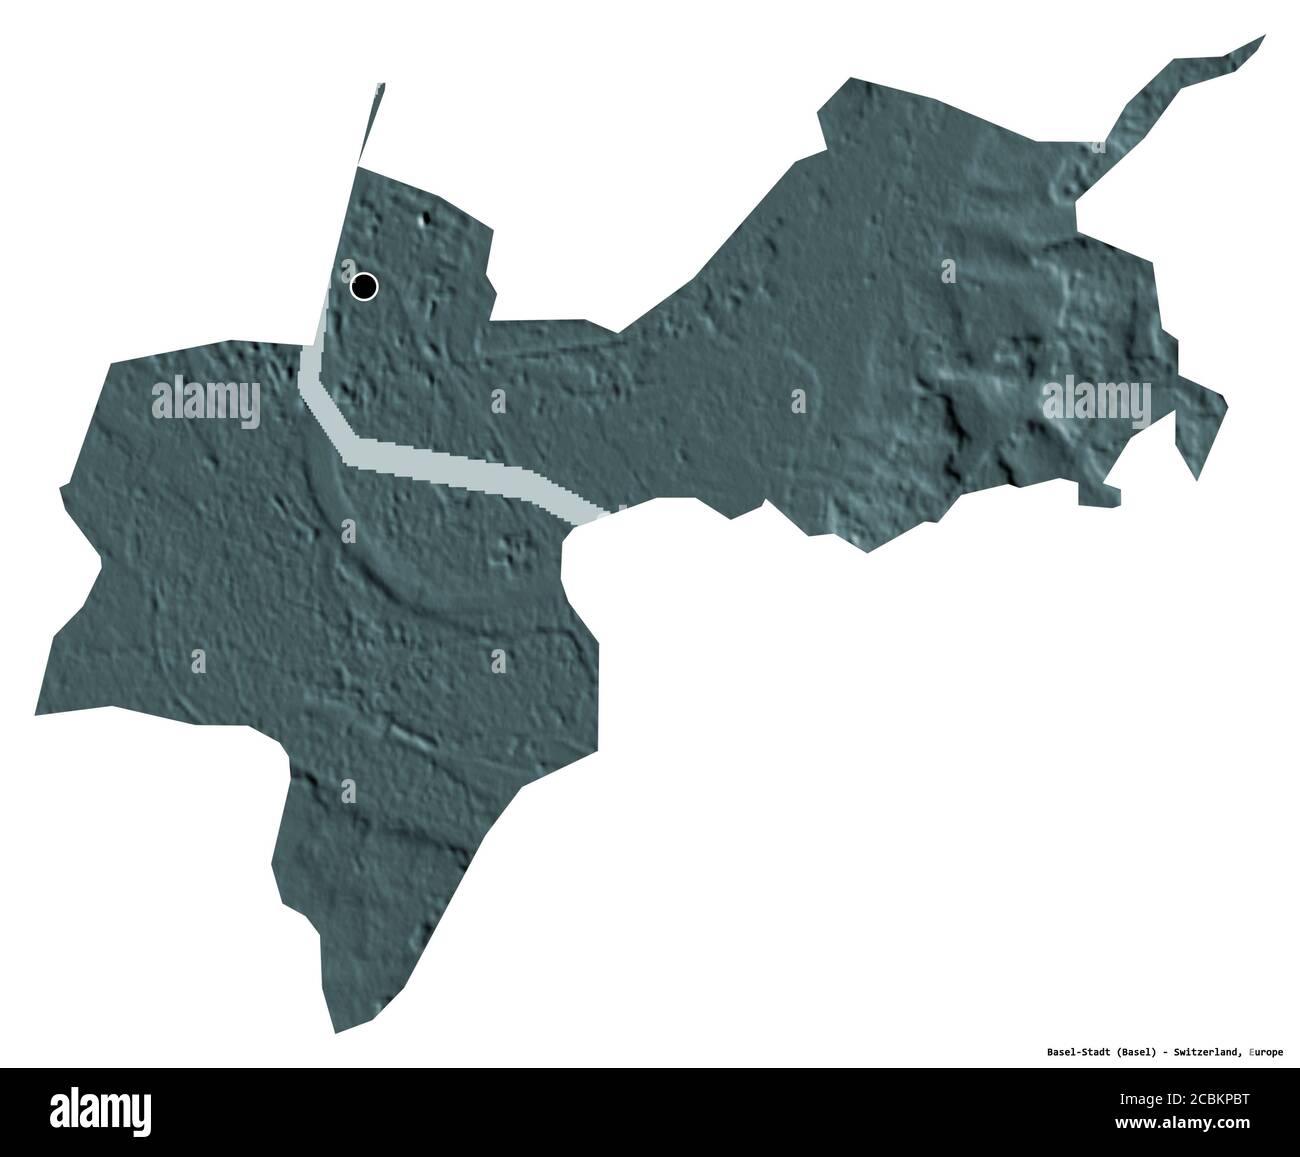 Shape of Basel-Stadt, canton of Switzerland, with its capital isolated on white background. Colored elevation map. 3D rendering Stock Photo